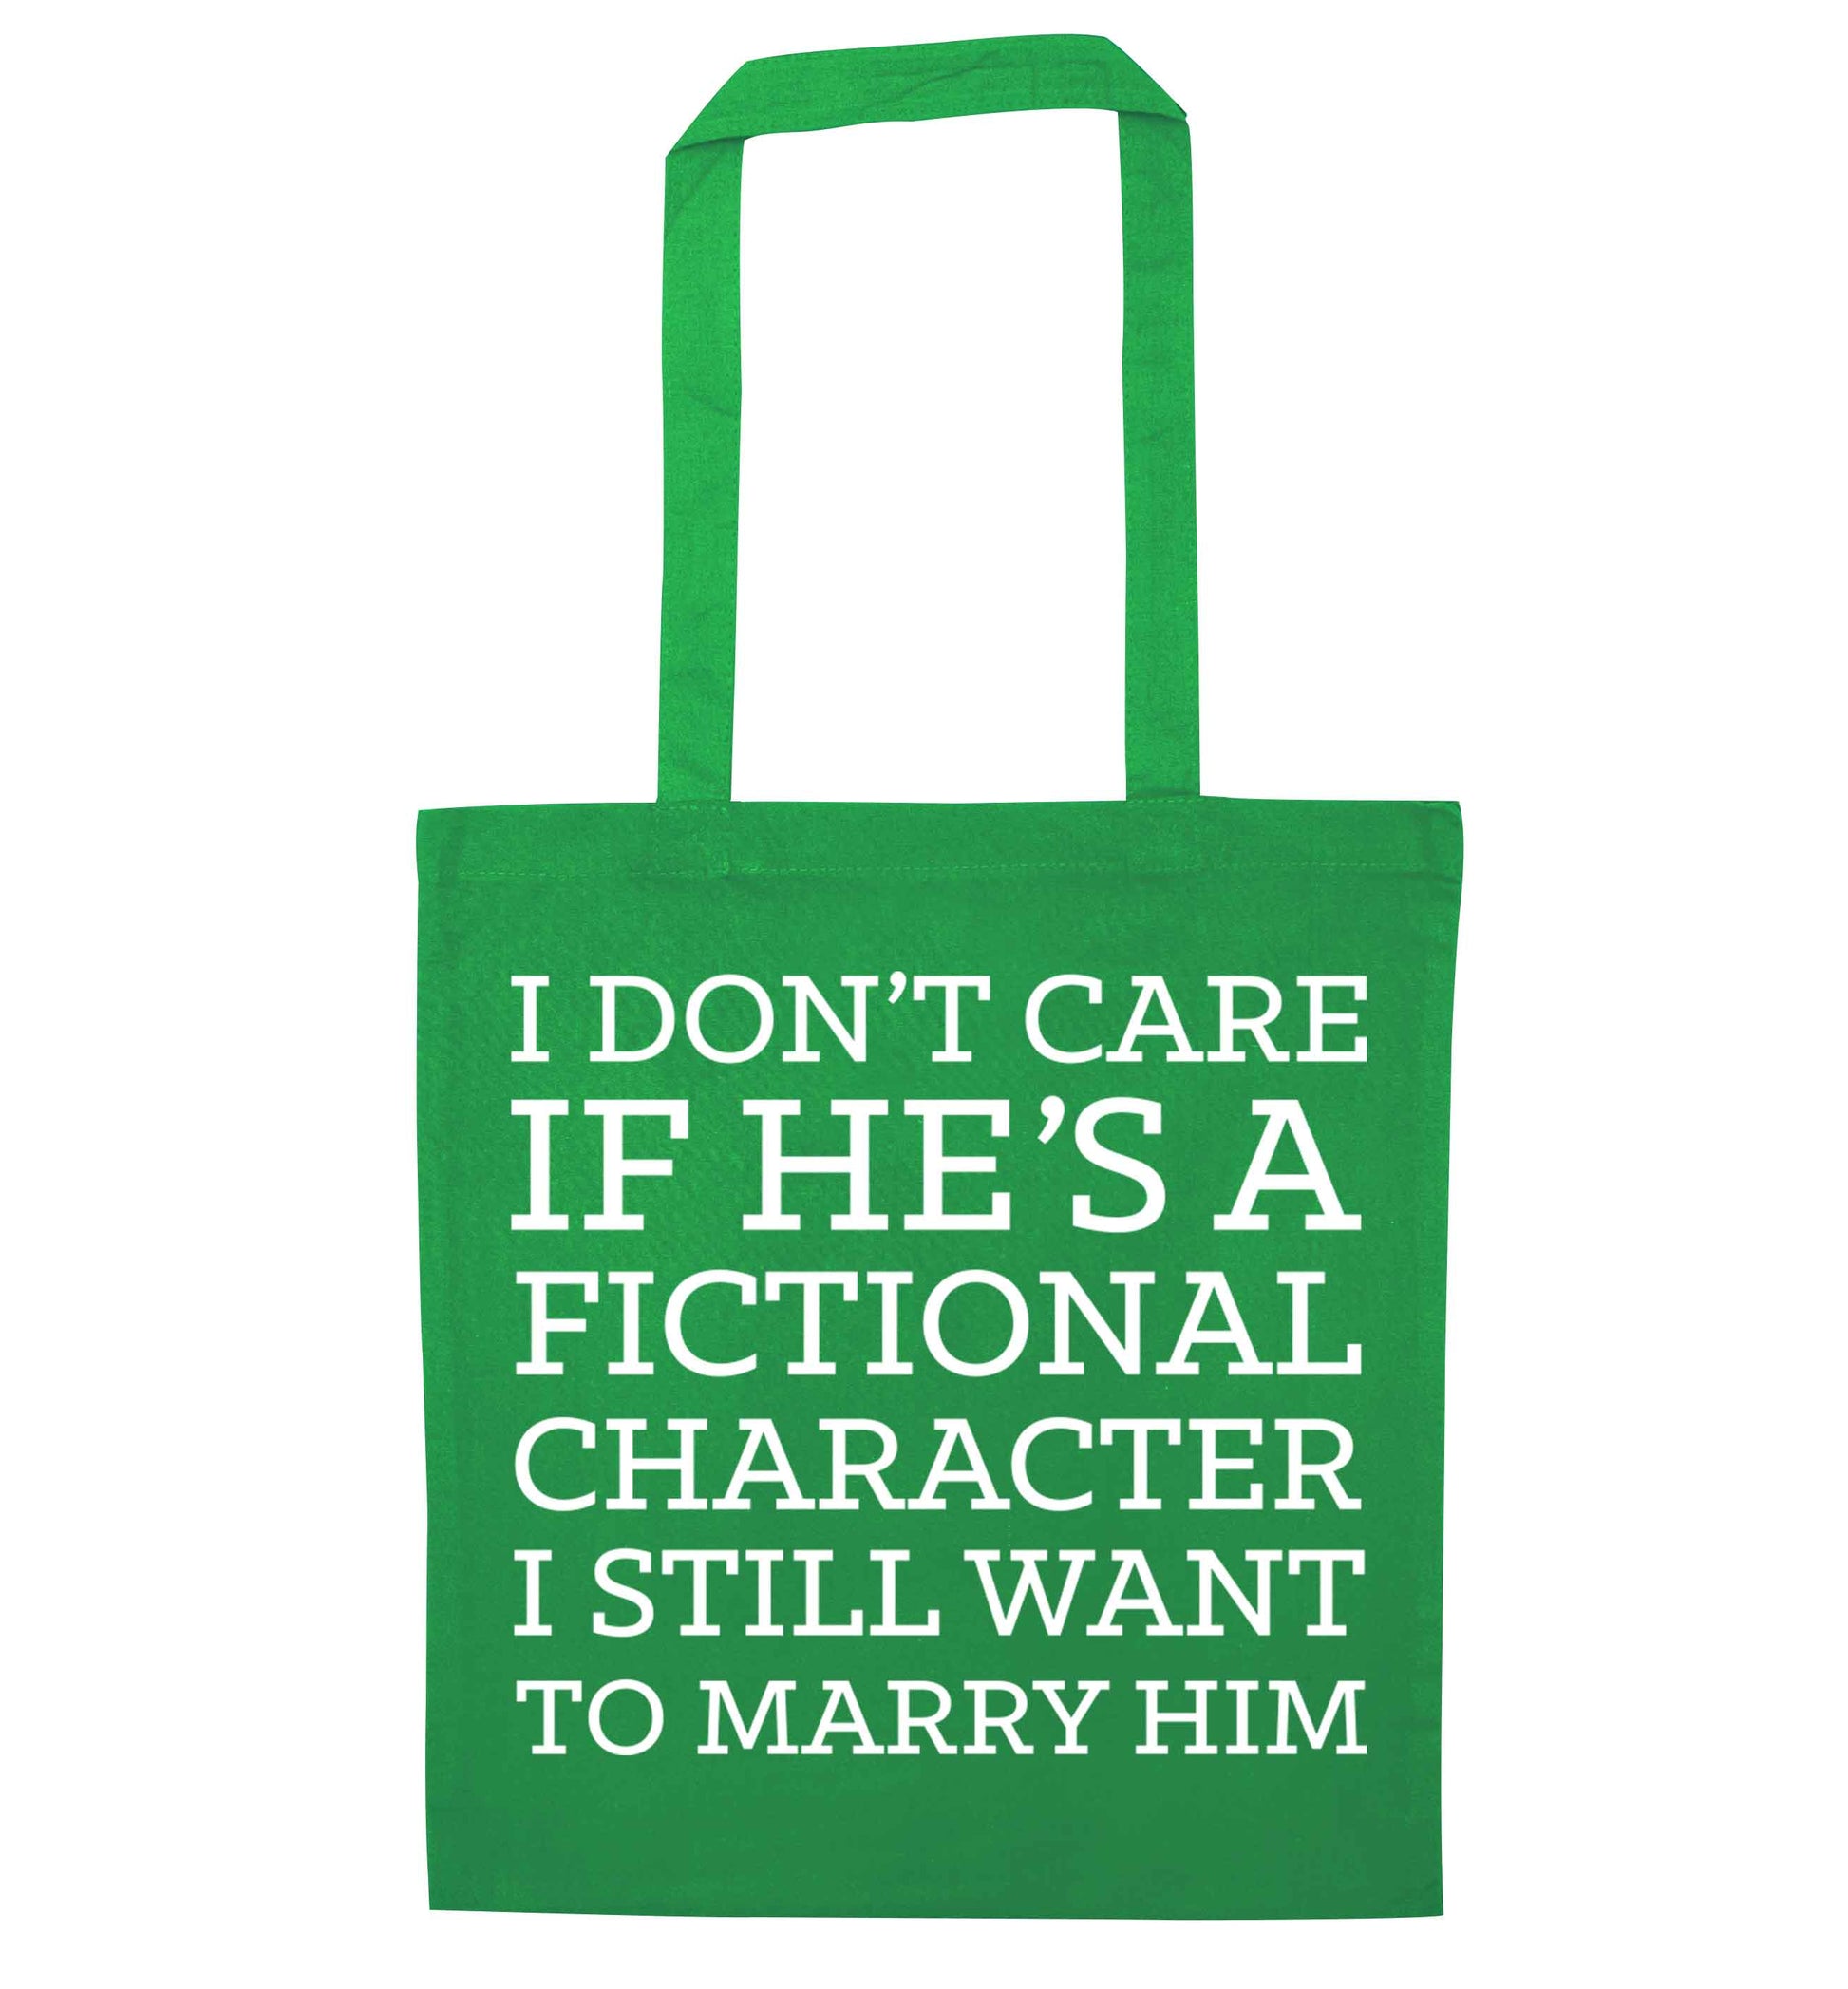 I don't care if he's a fictional character I still want to marry him green tote bag